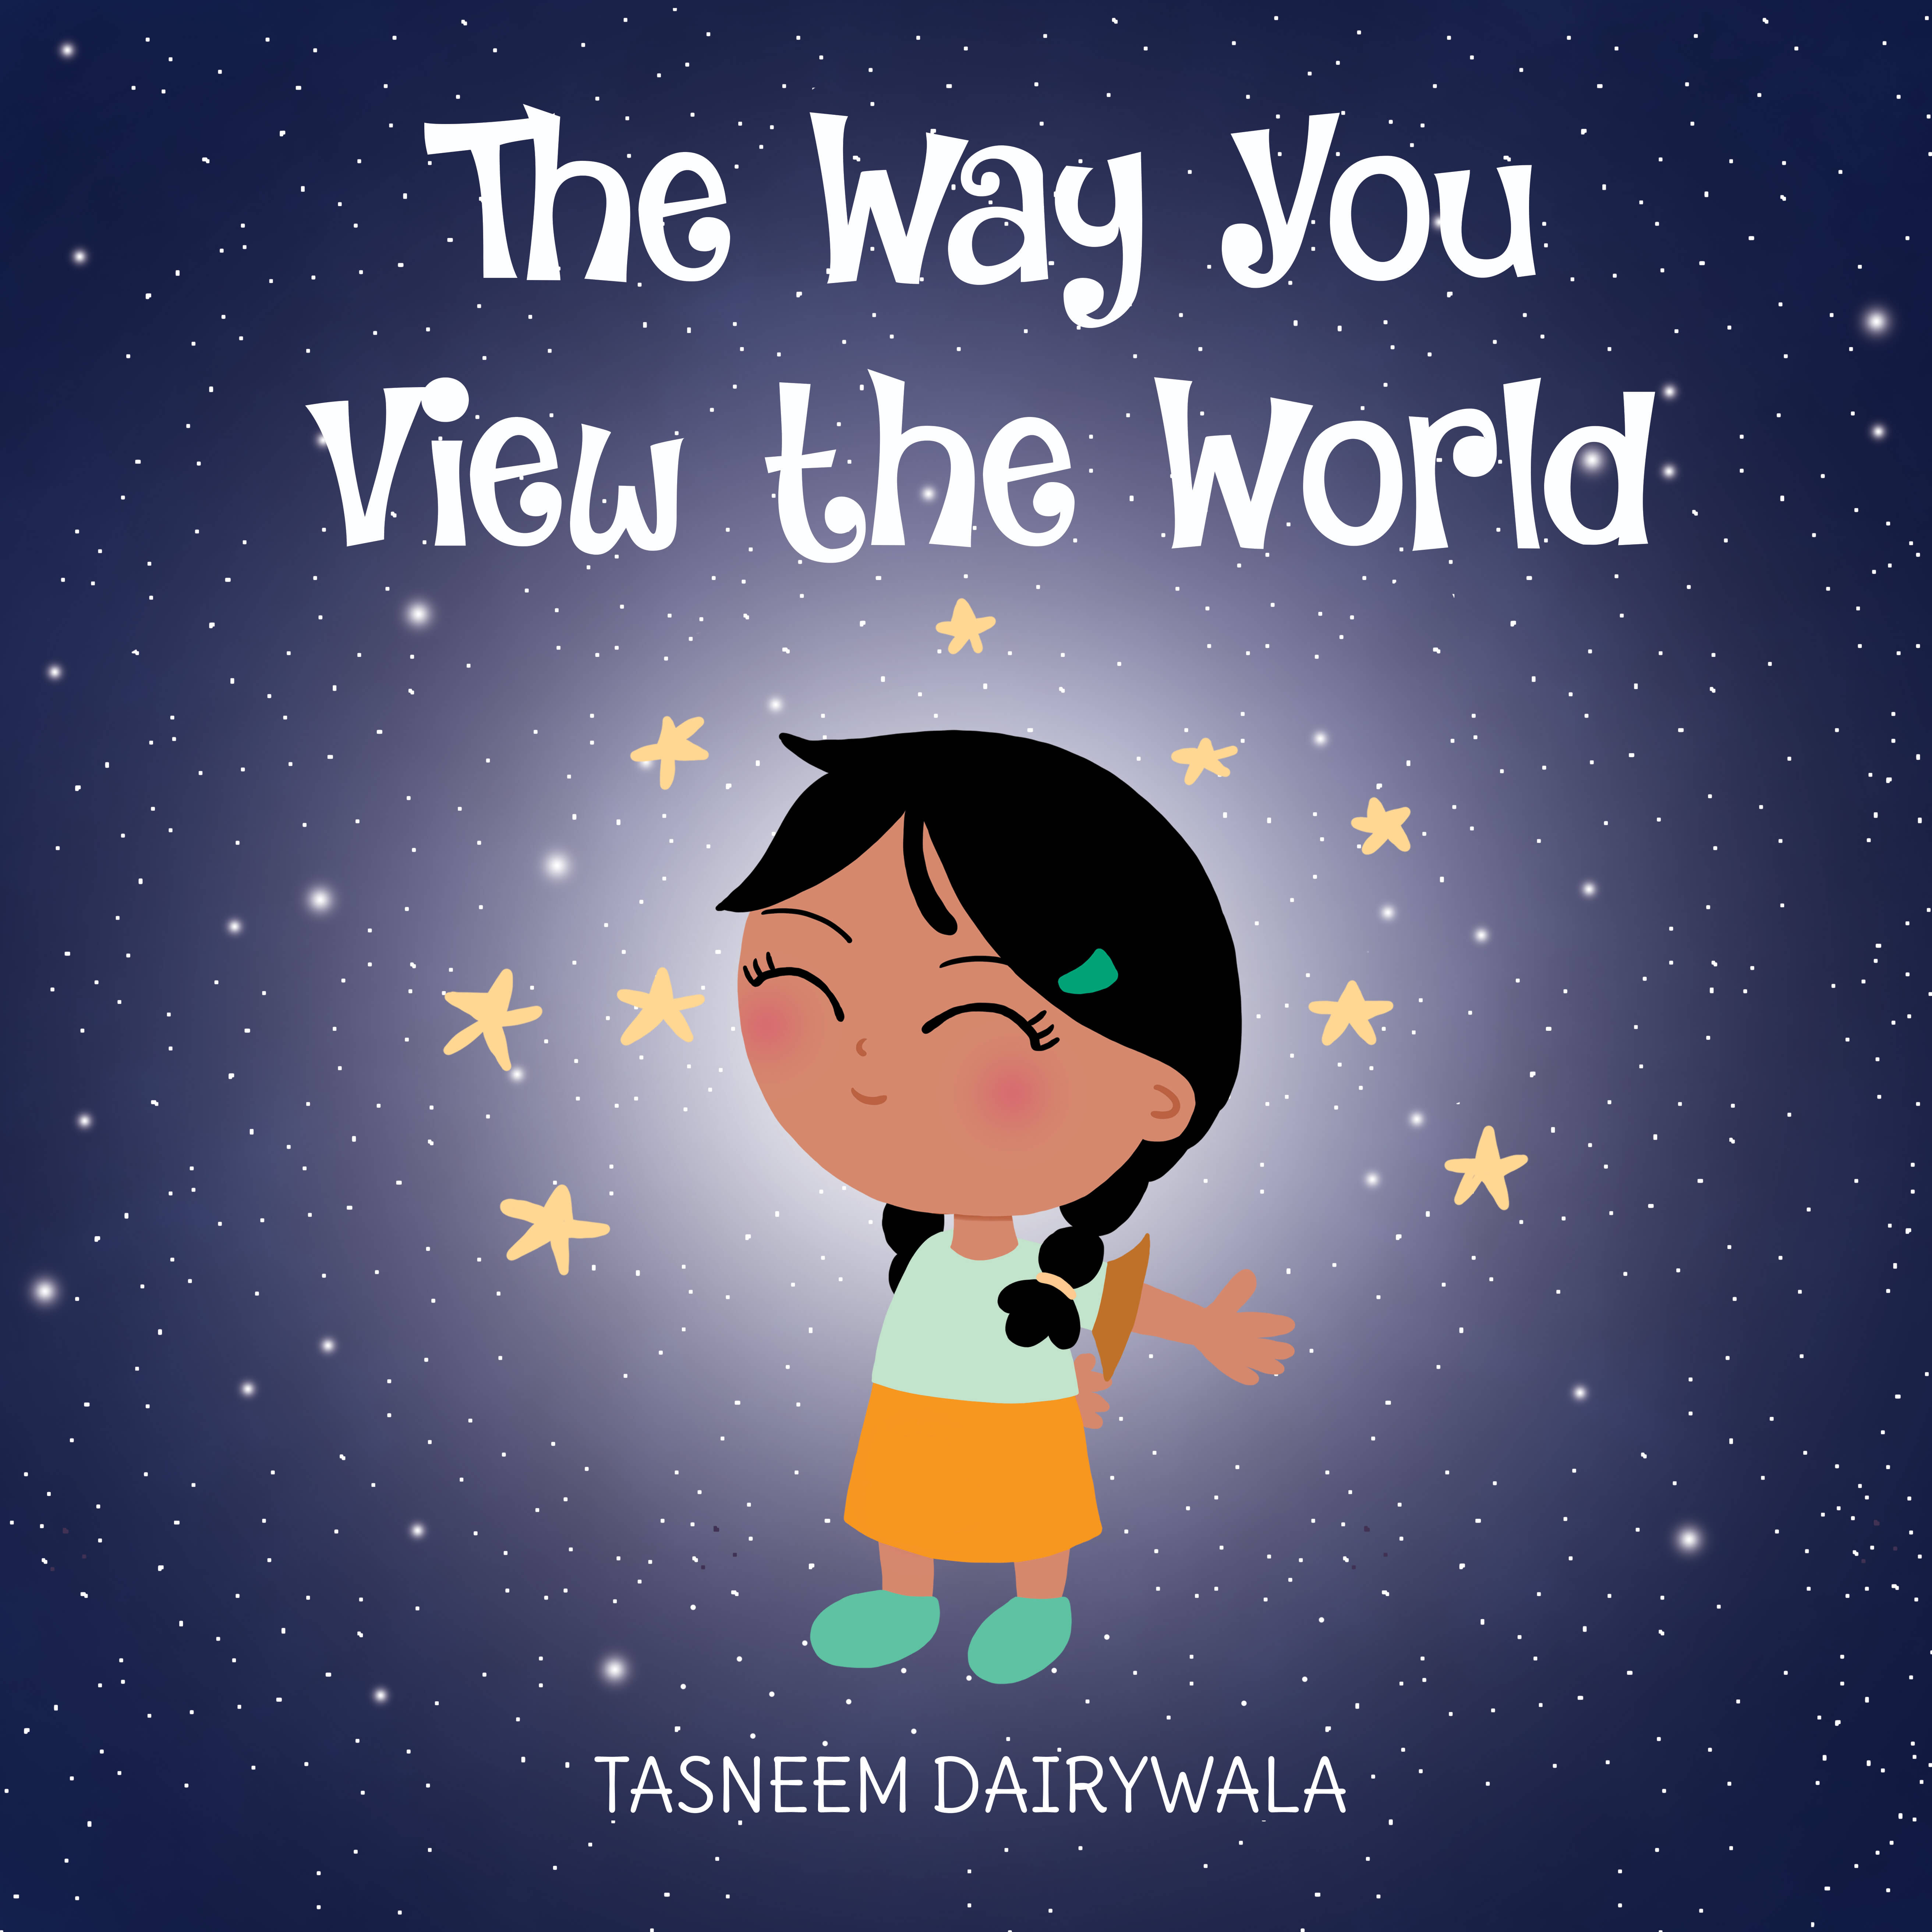 The Way You View the World